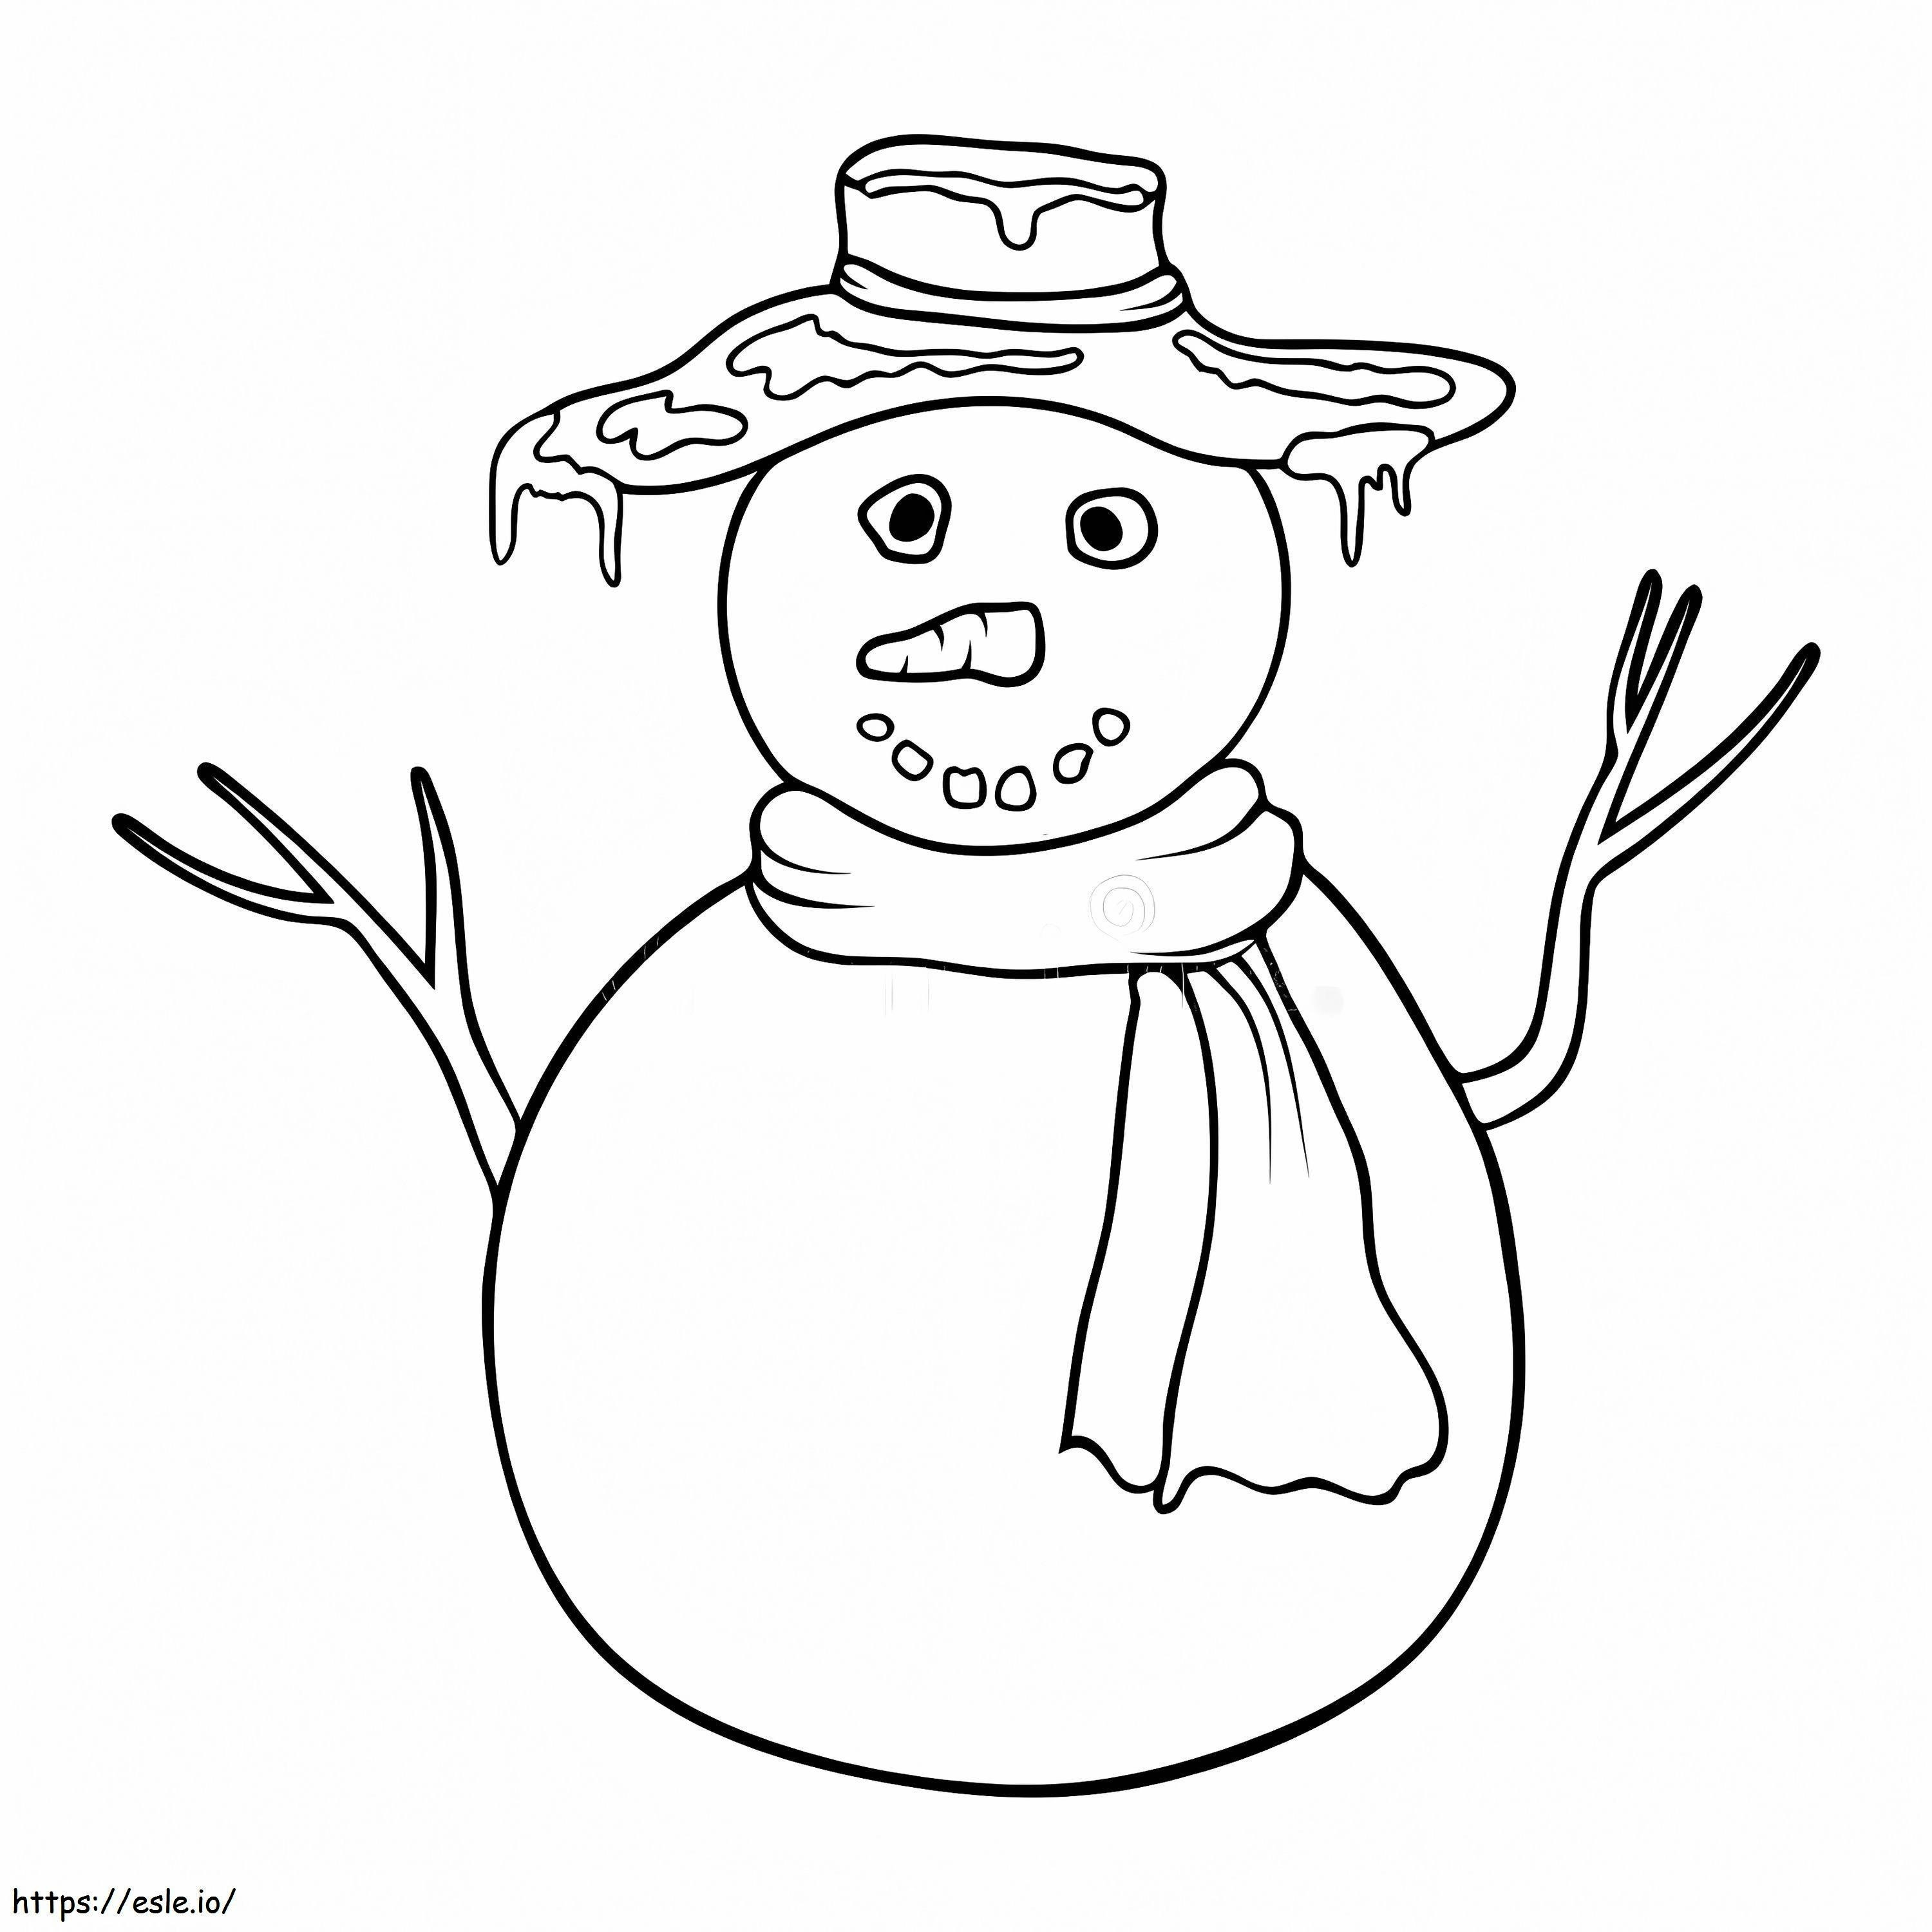 Good Snowman coloring page